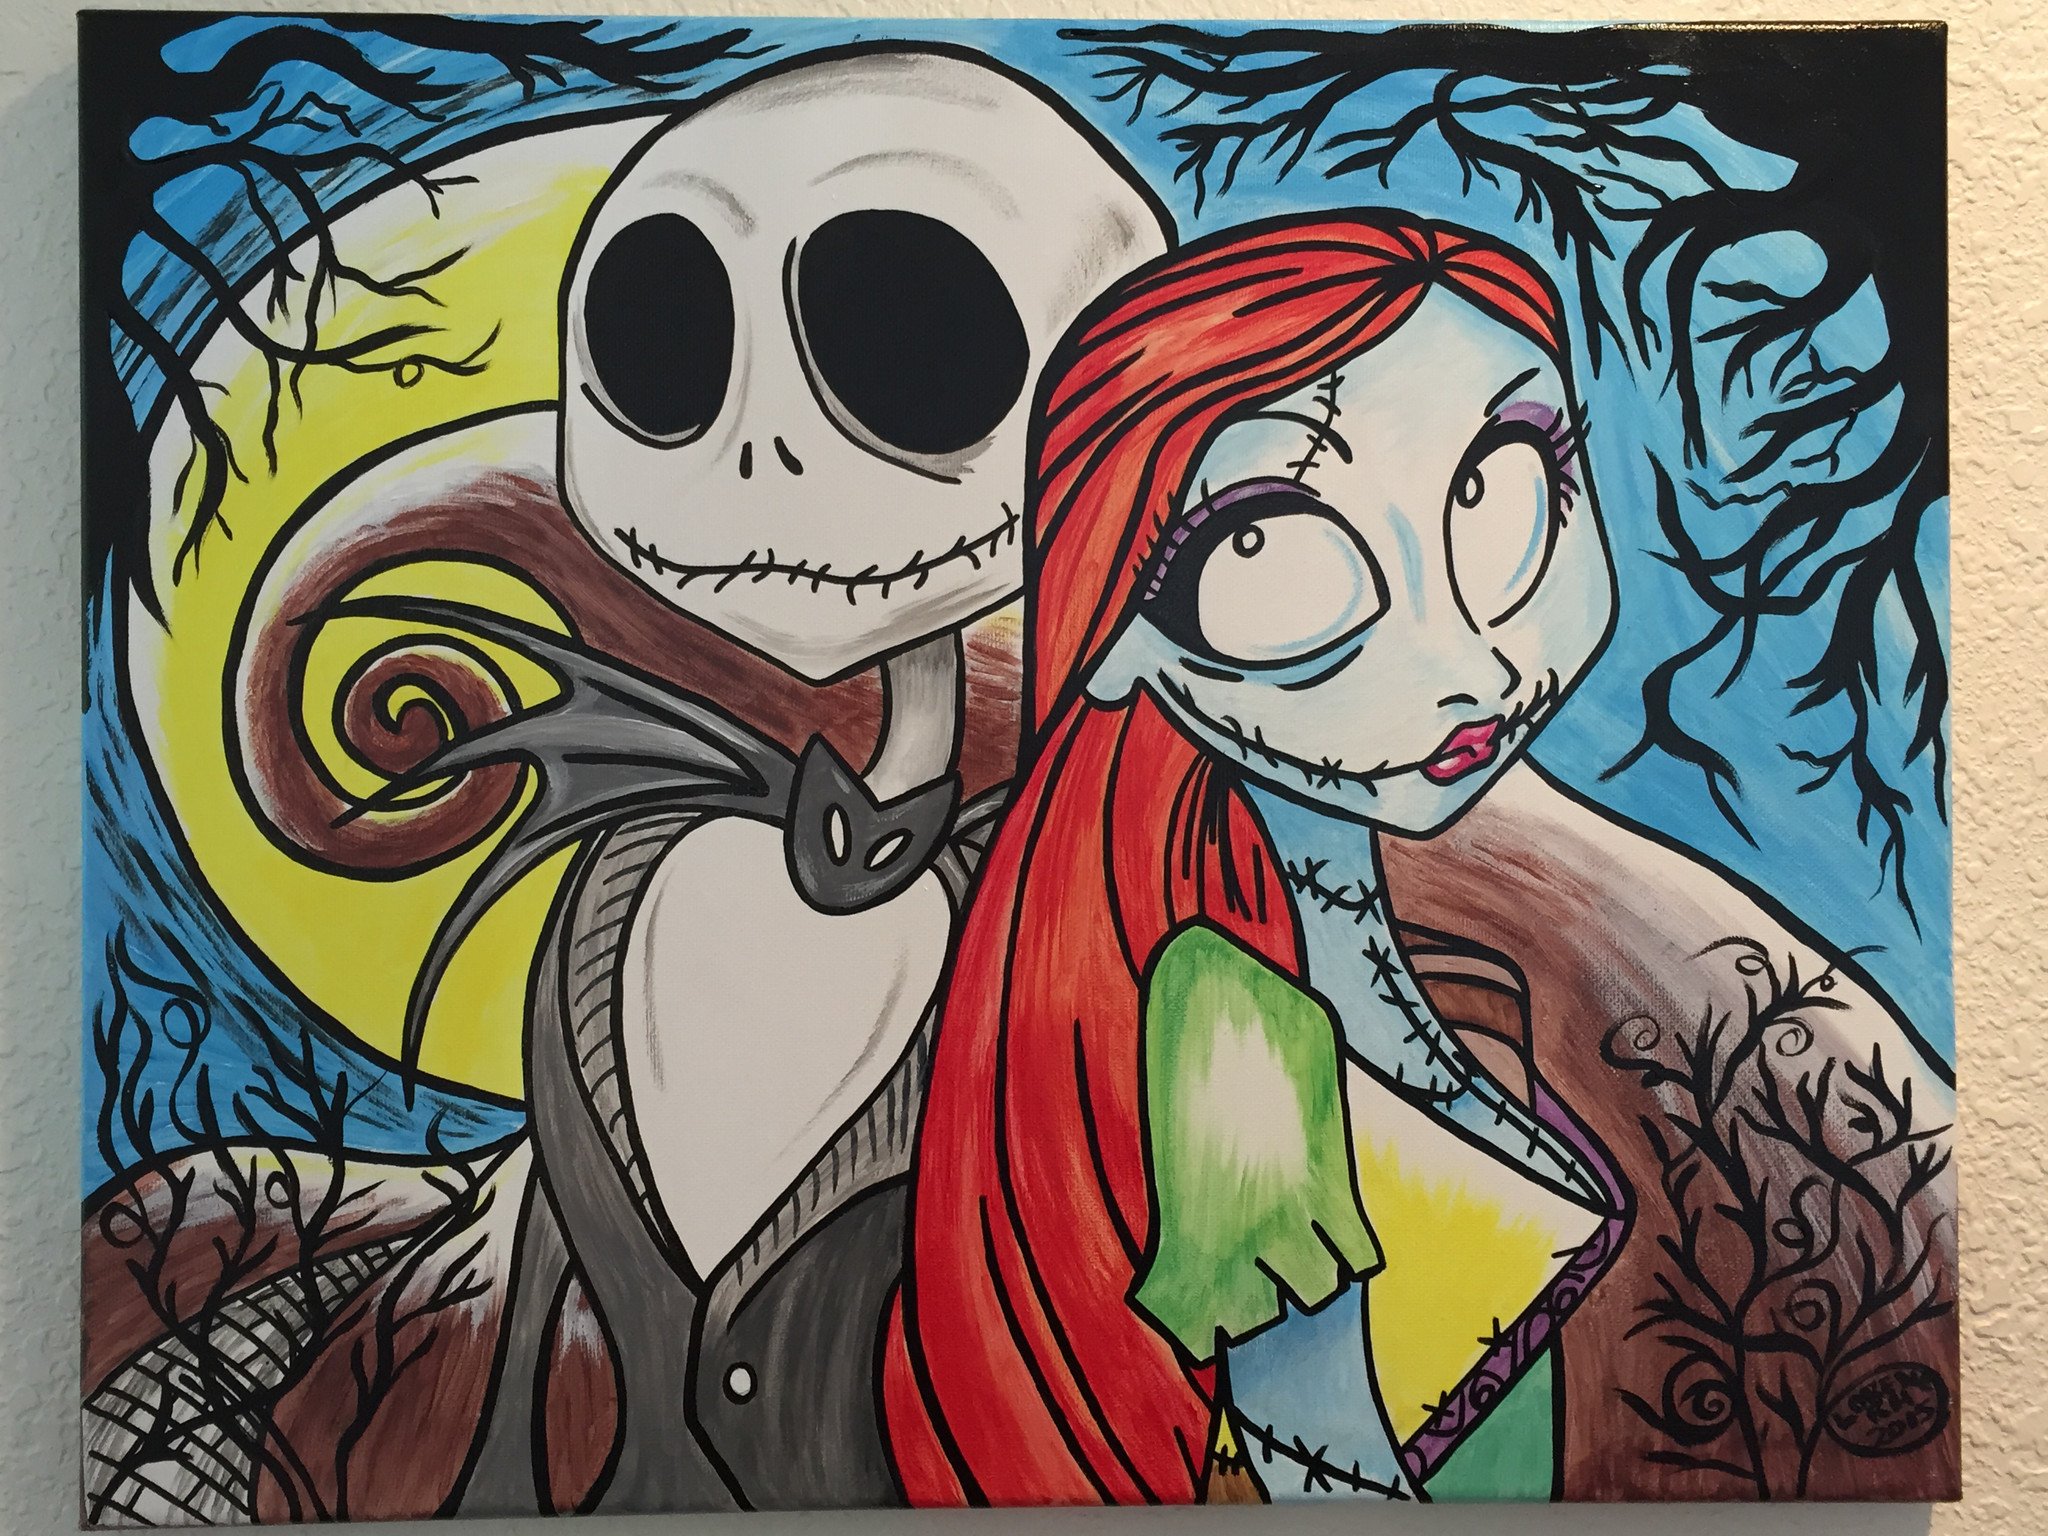 2048x1536 Jack And Sally Pin Possible Parties, Workshops Amp Artwork - Jack And ...